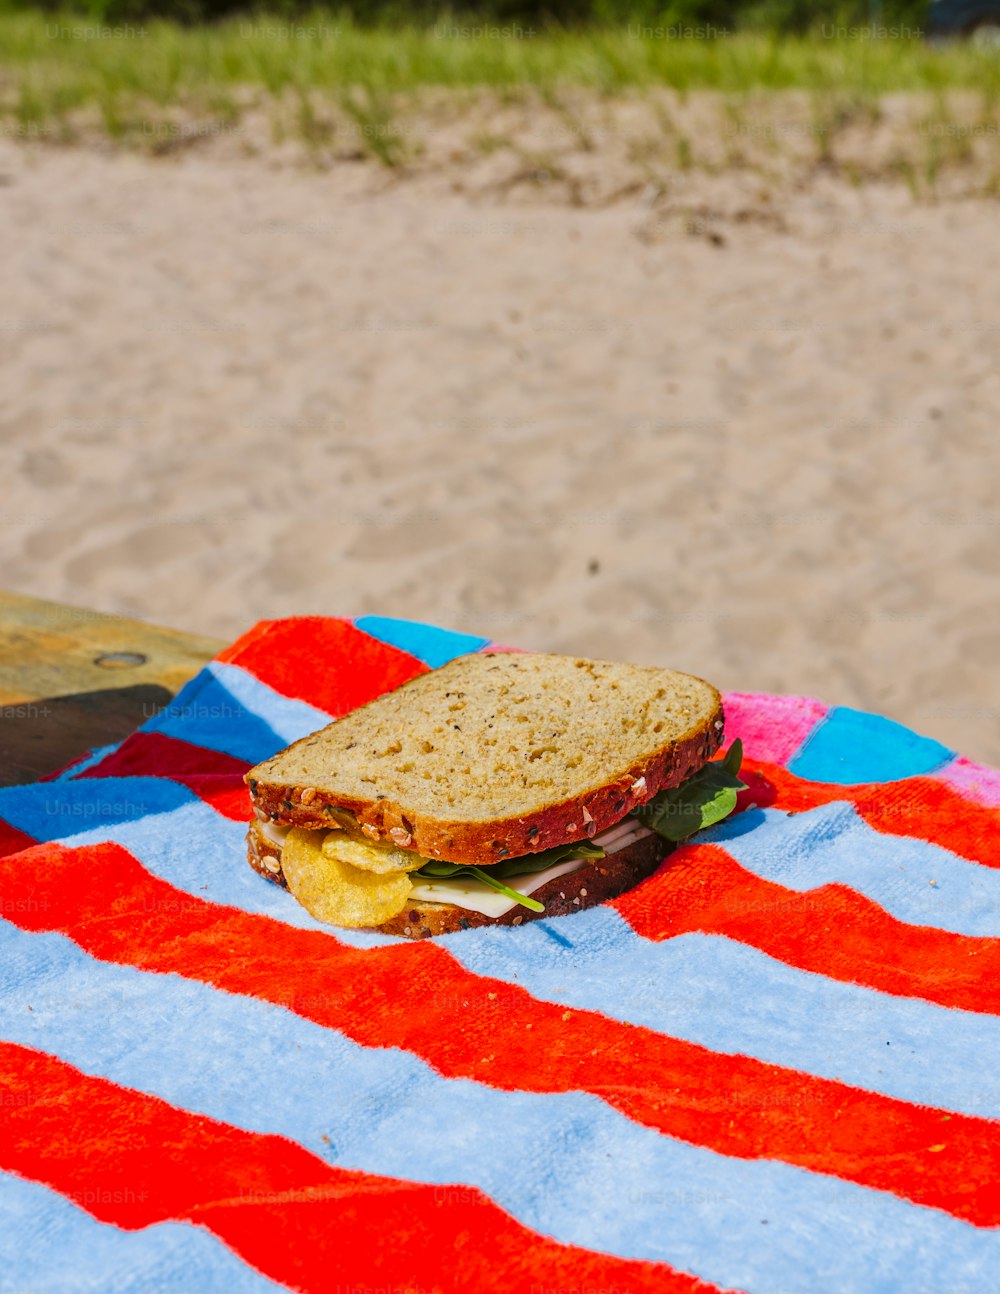 a sandwich sitting on top of a red, white and blue towel